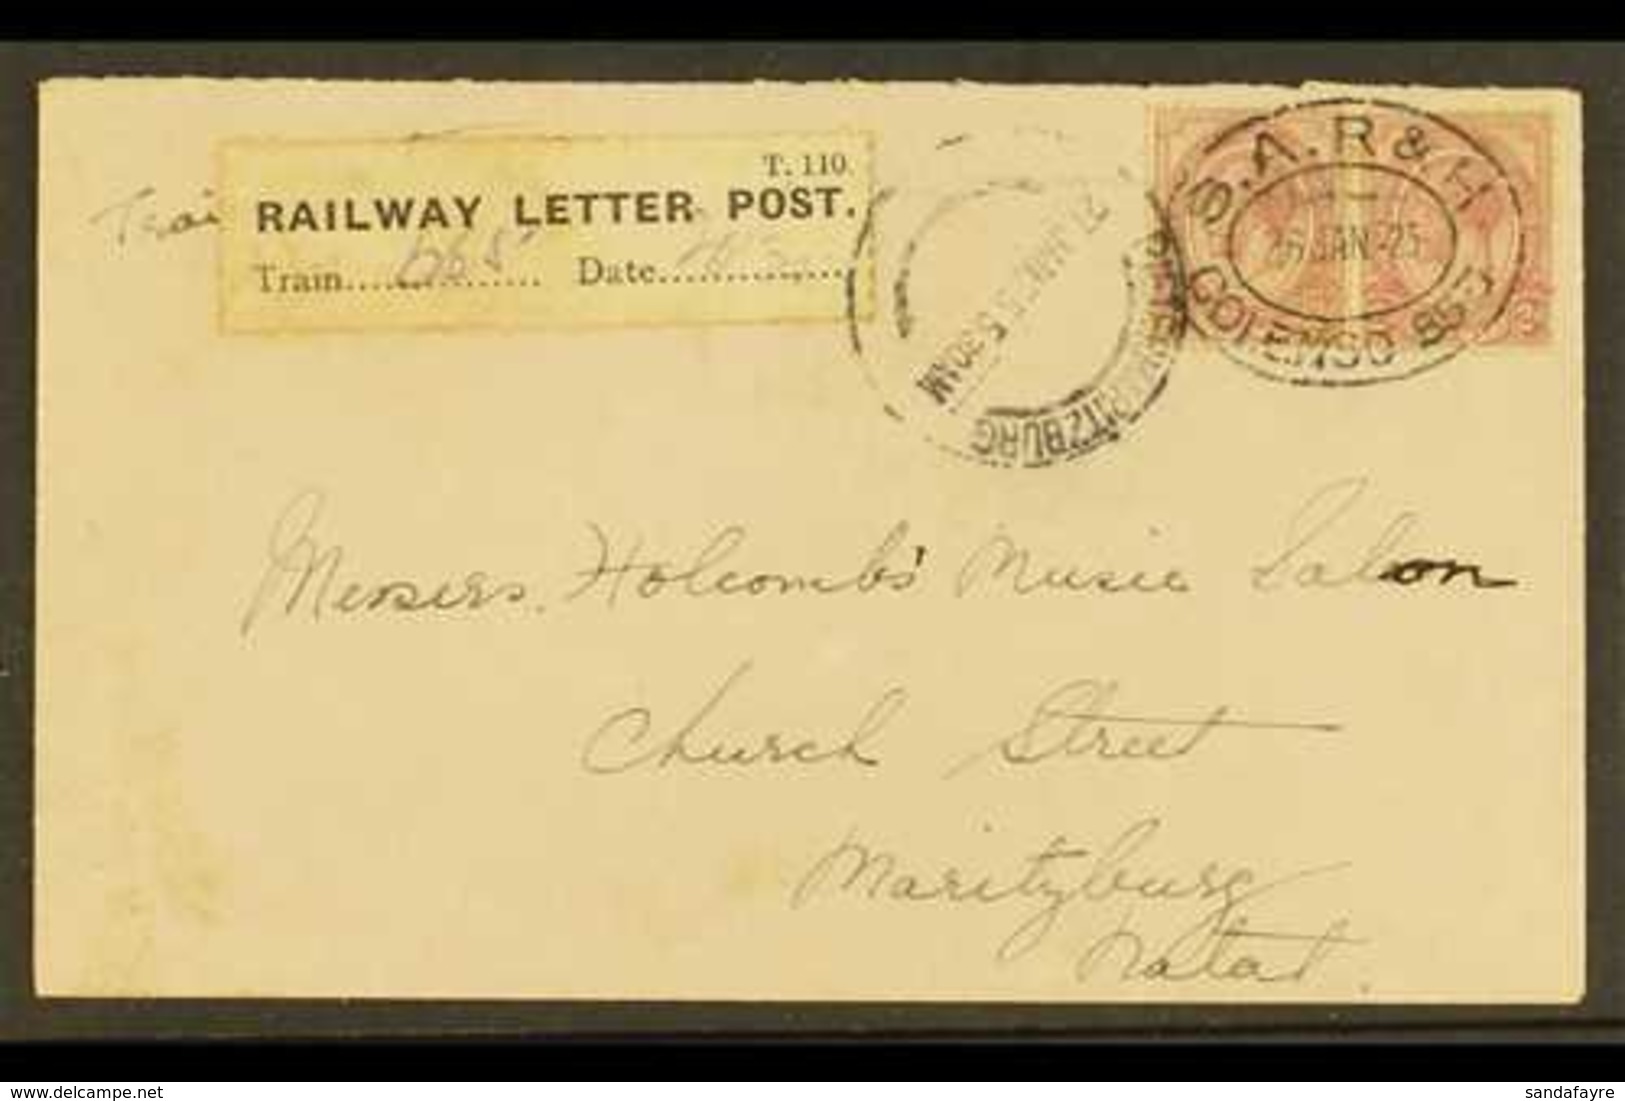 1925 RAILWAY LETTER POST COVER  2d KGV Pair On Cover, Cancelled With Oval "S.A.R. & H. COLENSO 853" 26.1.25 Postmark, "T - Non Classés